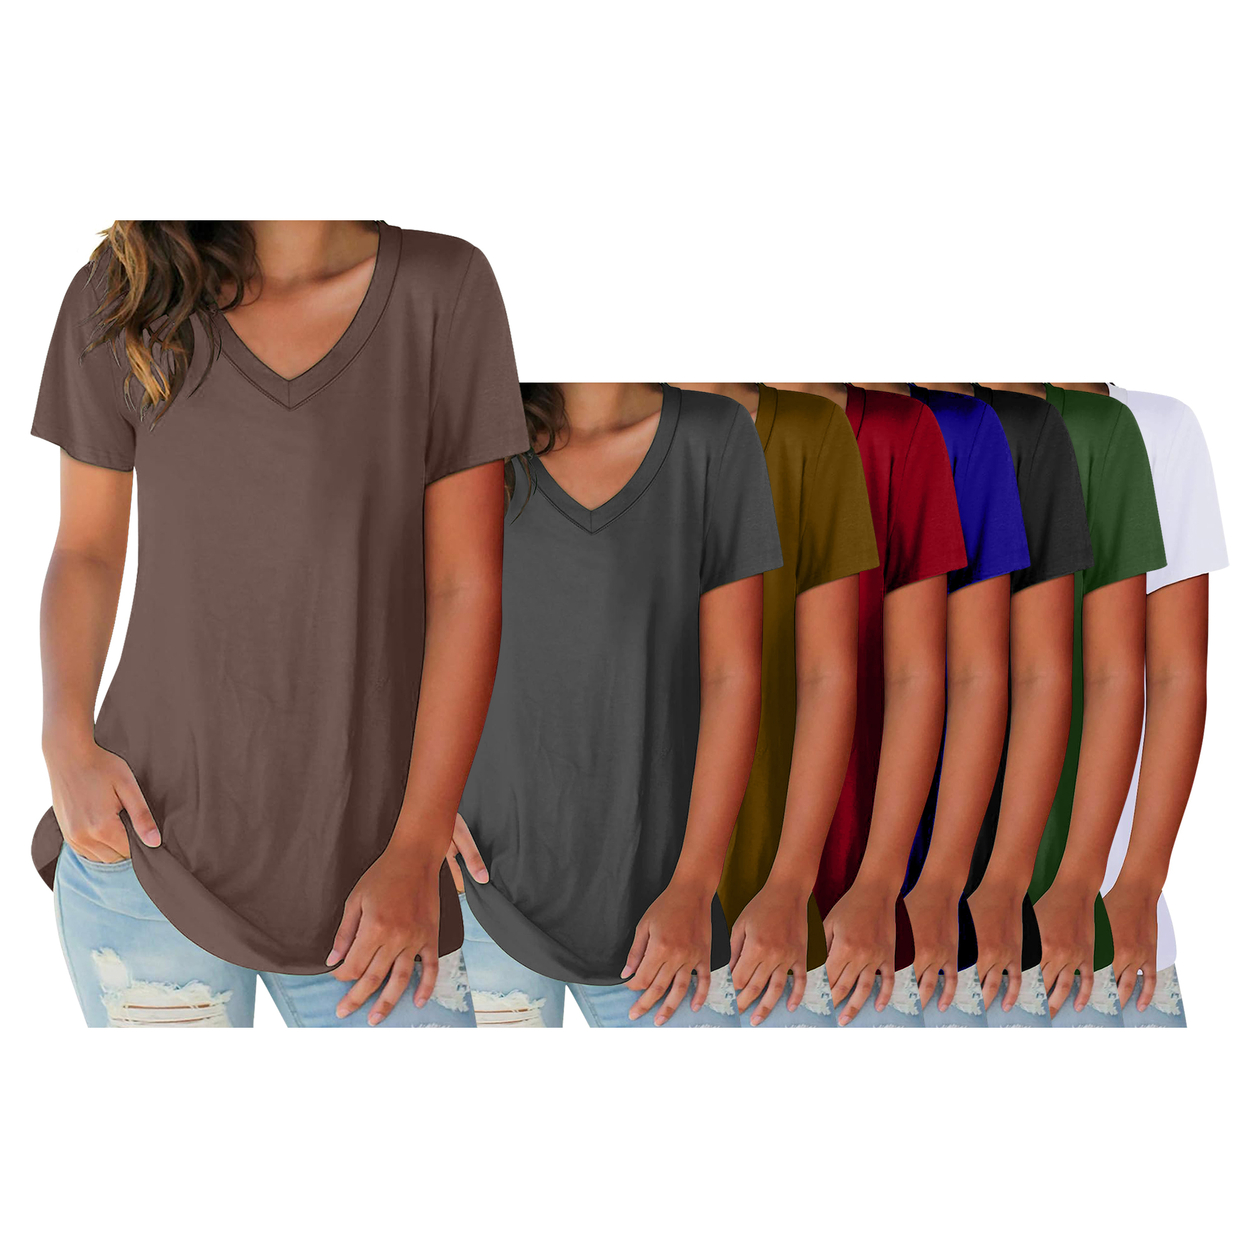 3-Pack: Women's Ultra Soft Smooth Cotton Blend Basic V-Neck Short Sleeve Shirts - Black, White, Brown, Small